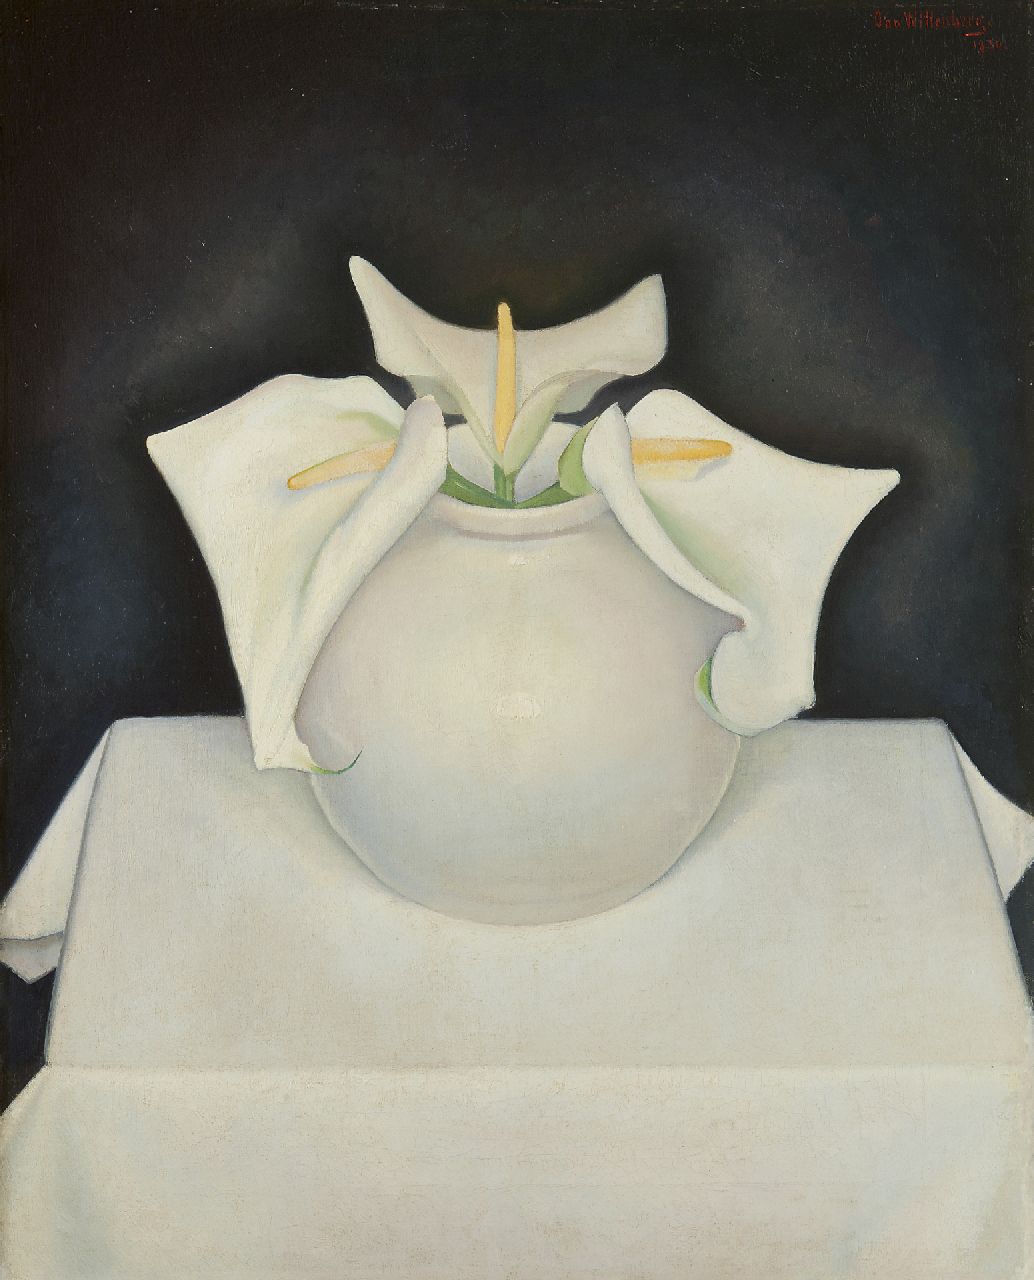 Wittenberg J.H.W.  | 'Jan' Hendrik Willem Wittenberg, Calla Lilies in a white vase, oil on canvas 53.6 x 42.7 cm, signed u.r. and dated 1930